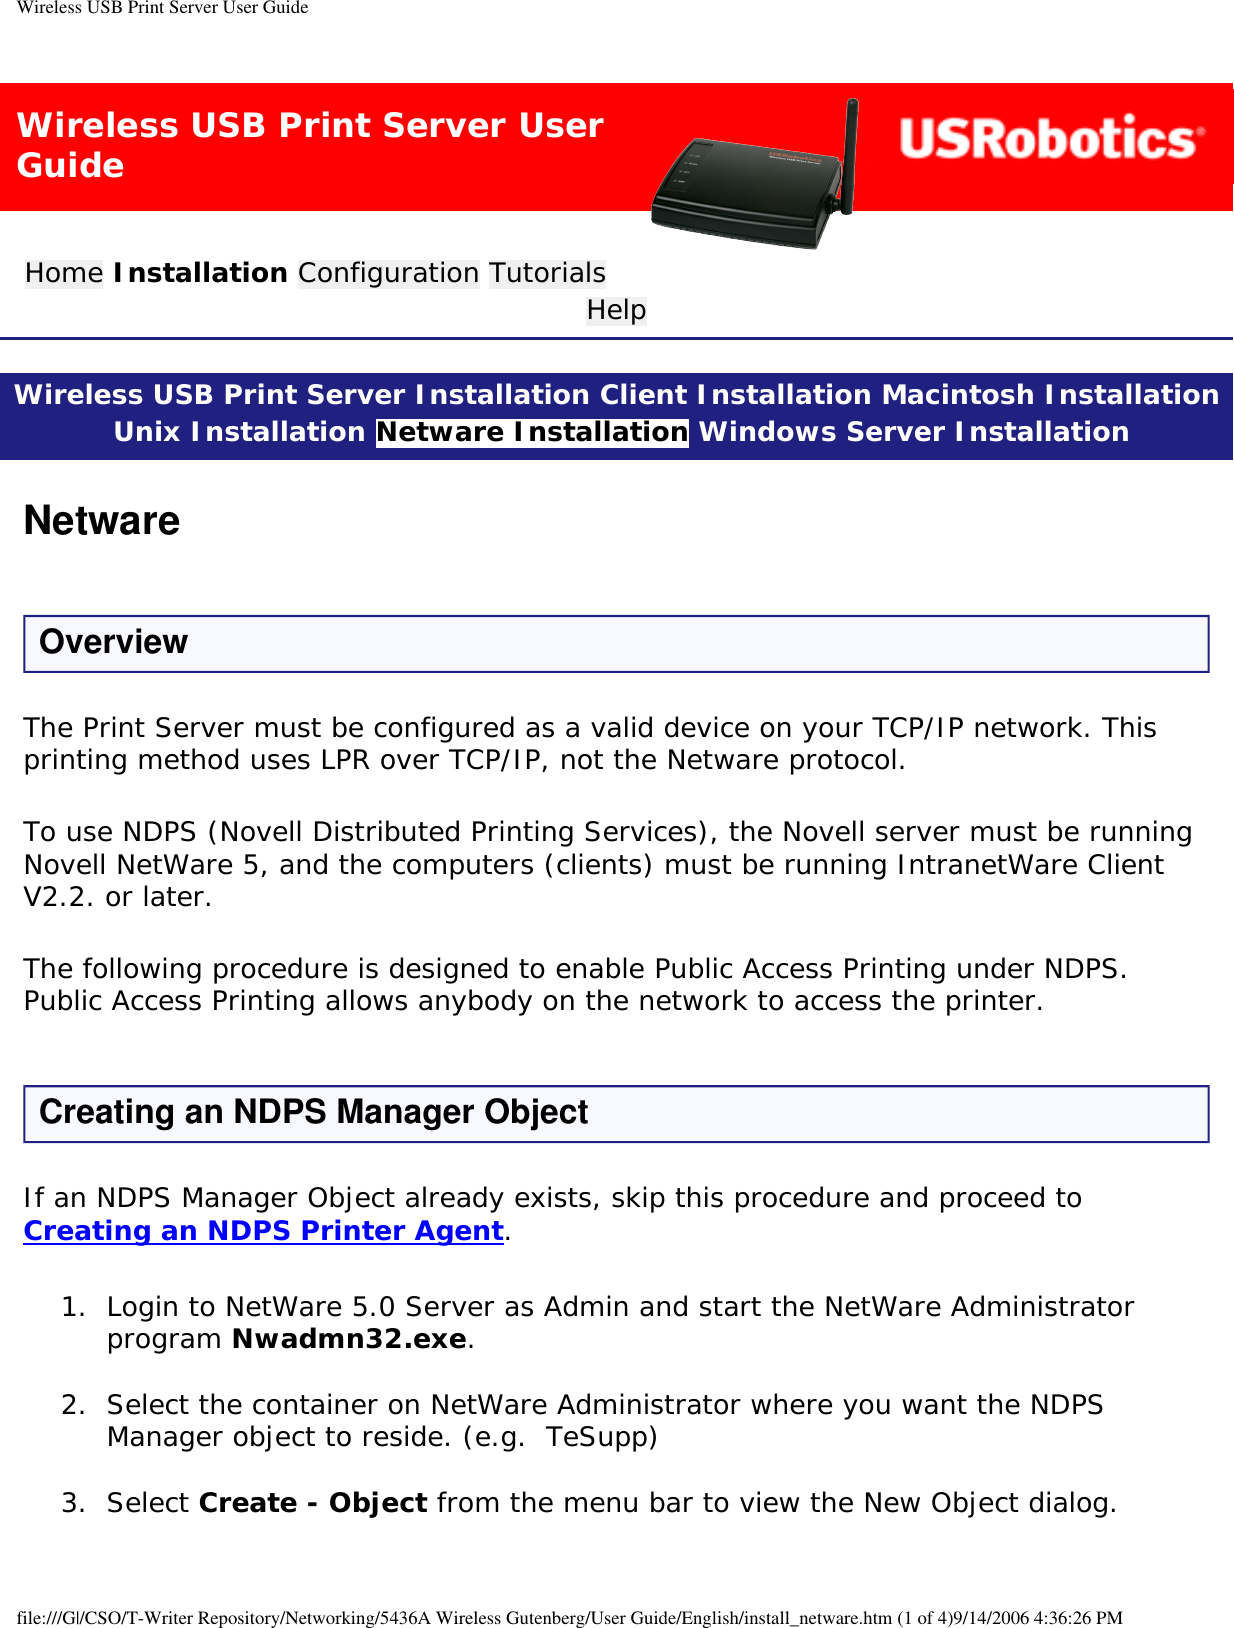 Wireless USB Print Server User GuideWireless USB Print Server User GuideHome Installation Configuration Tutorials Help Wireless USB Print Server Installation Client Installation Macintosh Installation Unix Installation Netware Installation Windows Server Installation NetwareOverviewThe Print Server must be configured as a valid device on your TCP/IP network. This printing method uses LPR over TCP/IP, not the Netware protocol.To use NDPS (Novell Distributed Printing Services), the Novell server must be running Novell NetWare 5, and the computers (clients) must be running IntranetWare Client V2.2. or later.The following procedure is designed to enable Public Access Printing under NDPS. Public Access Printing allows anybody on the network to access the printer.Creating an NDPS Manager ObjectIf an NDPS Manager Object already exists, skip this procedure and proceed to Creating an NDPS Printer Agent.1.  Login to NetWare 5.0 Server as Admin and start the NetWare Administrator program Nwadmn32.exe. 2.  Select the container on NetWare Administrator where you want the NDPS Manager object to reside. (e.g.  TeSupp) 3.  Select Create - Object from the menu bar to view the New Object dialog. file:///G|/CSO/T-Writer Repository/Networking/5436A Wireless Gutenberg/User Guide/English/install_netware.htm (1 of 4)9/14/2006 4:36:26 PM